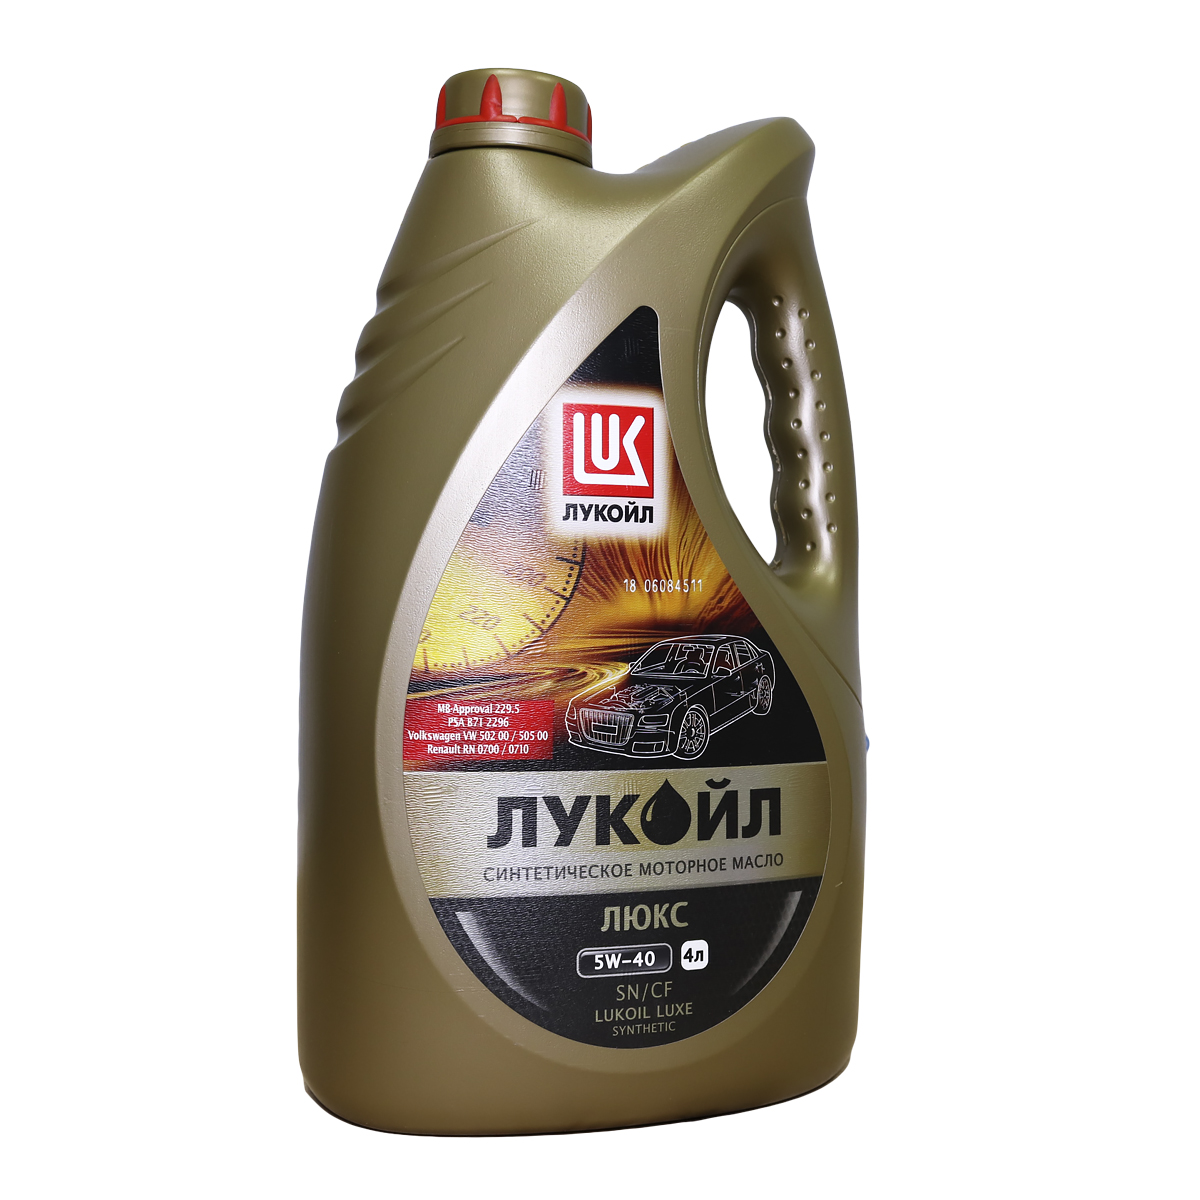 Моторное масло lukoil 5w40 4л. Масло Лукойл SN CF 5w40. Лукойл Люкс 5w40 синтетика 5л. Масло Лукойл синтетик Люкс 5w40. Лукойл 5w40 синтетика 5л.